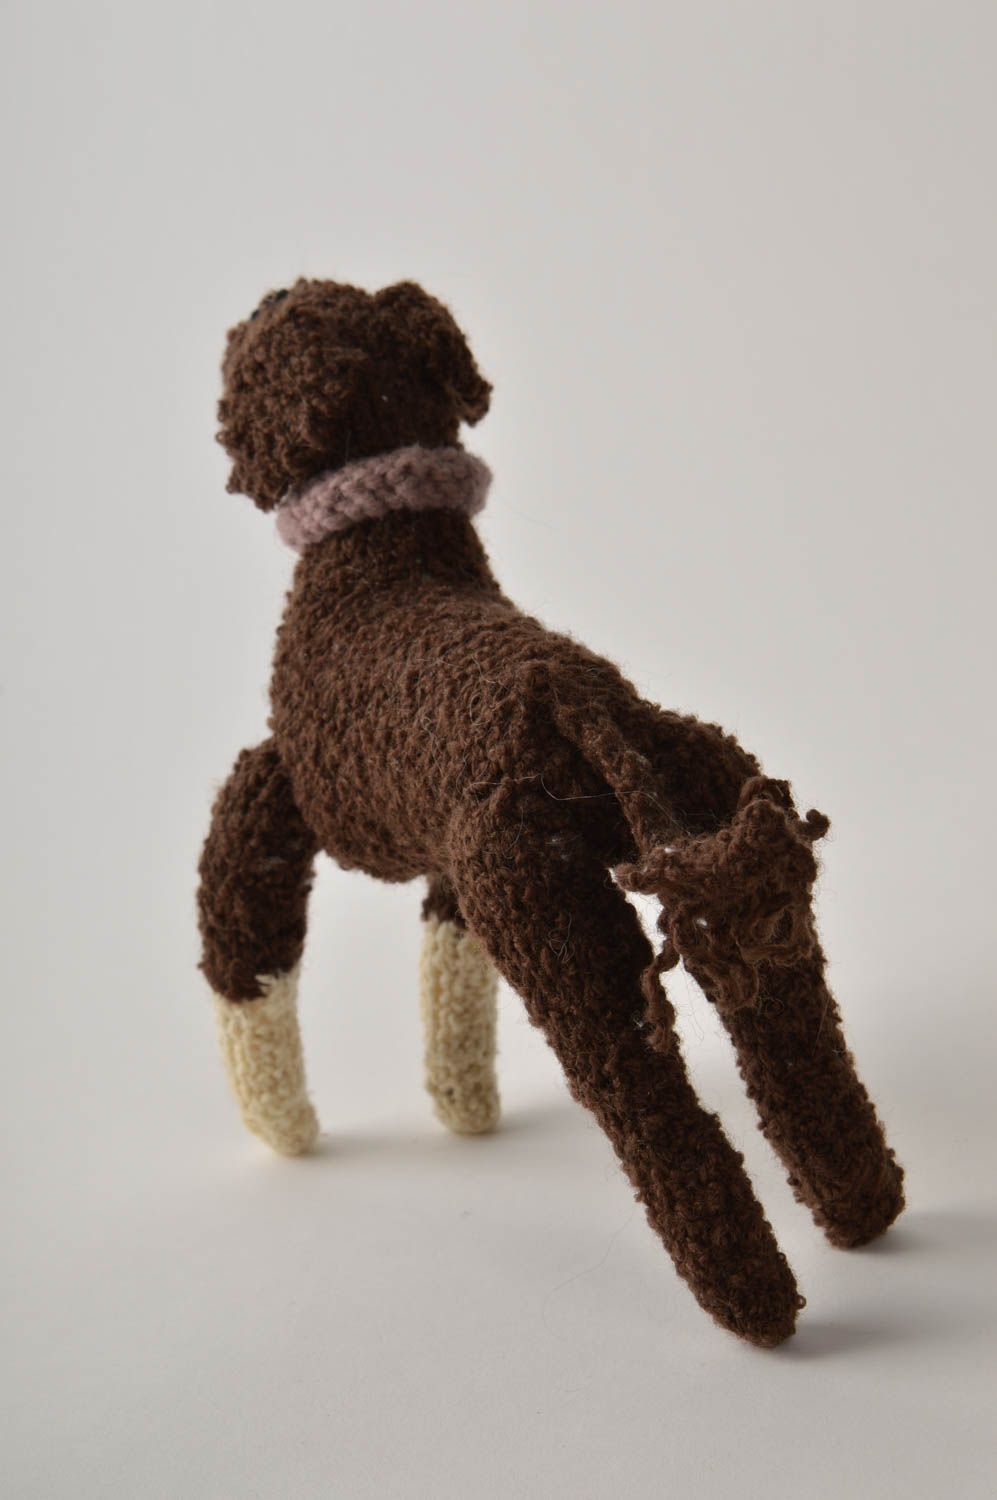 Unusual handmade soft toy knitted toy cool rooms gift ideas decorative use only photo 4